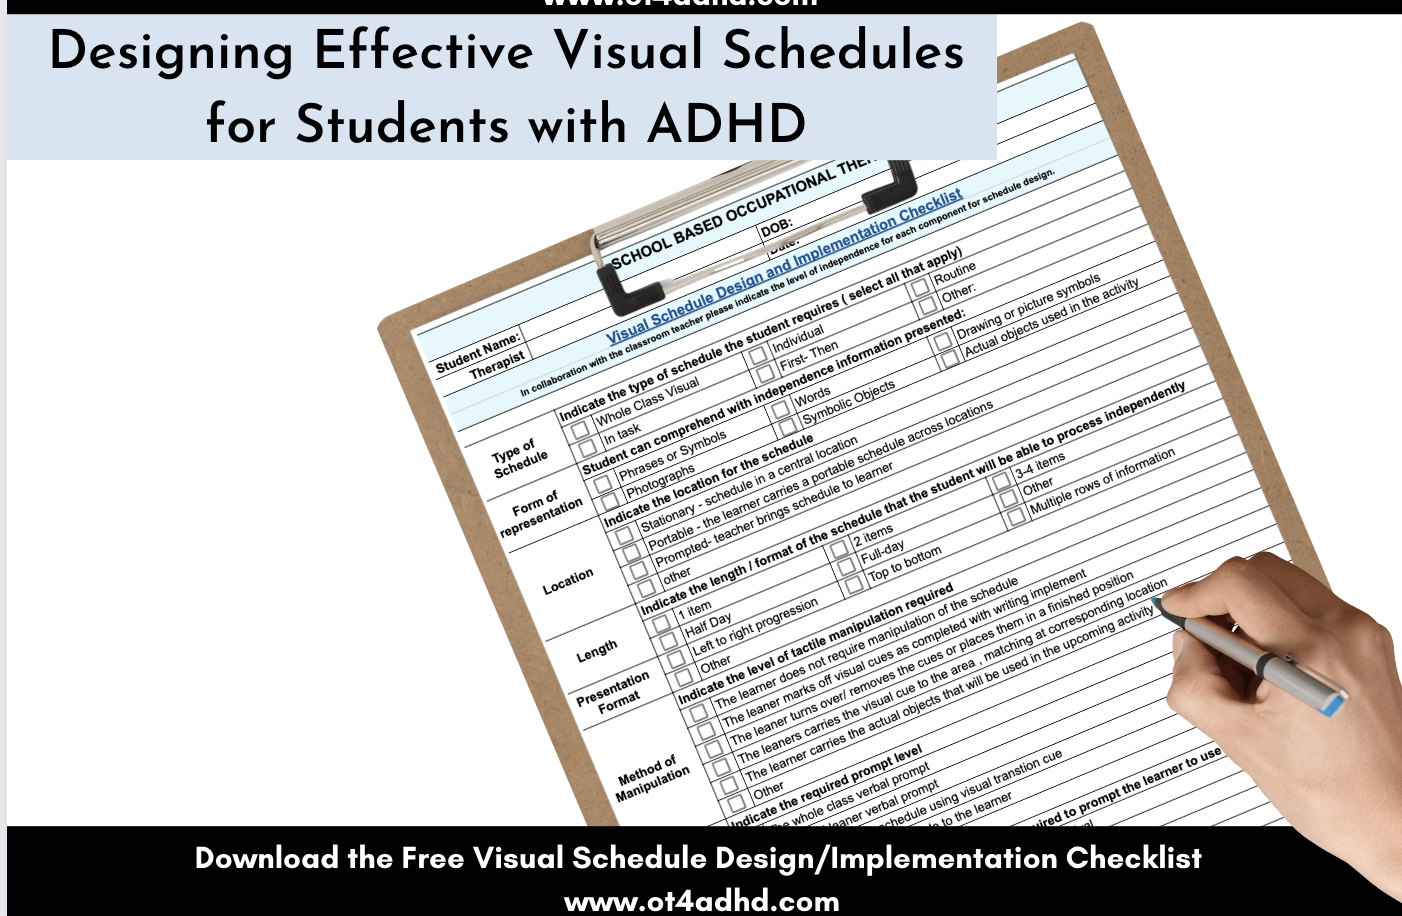 Effective Visual Schedules for ADHD